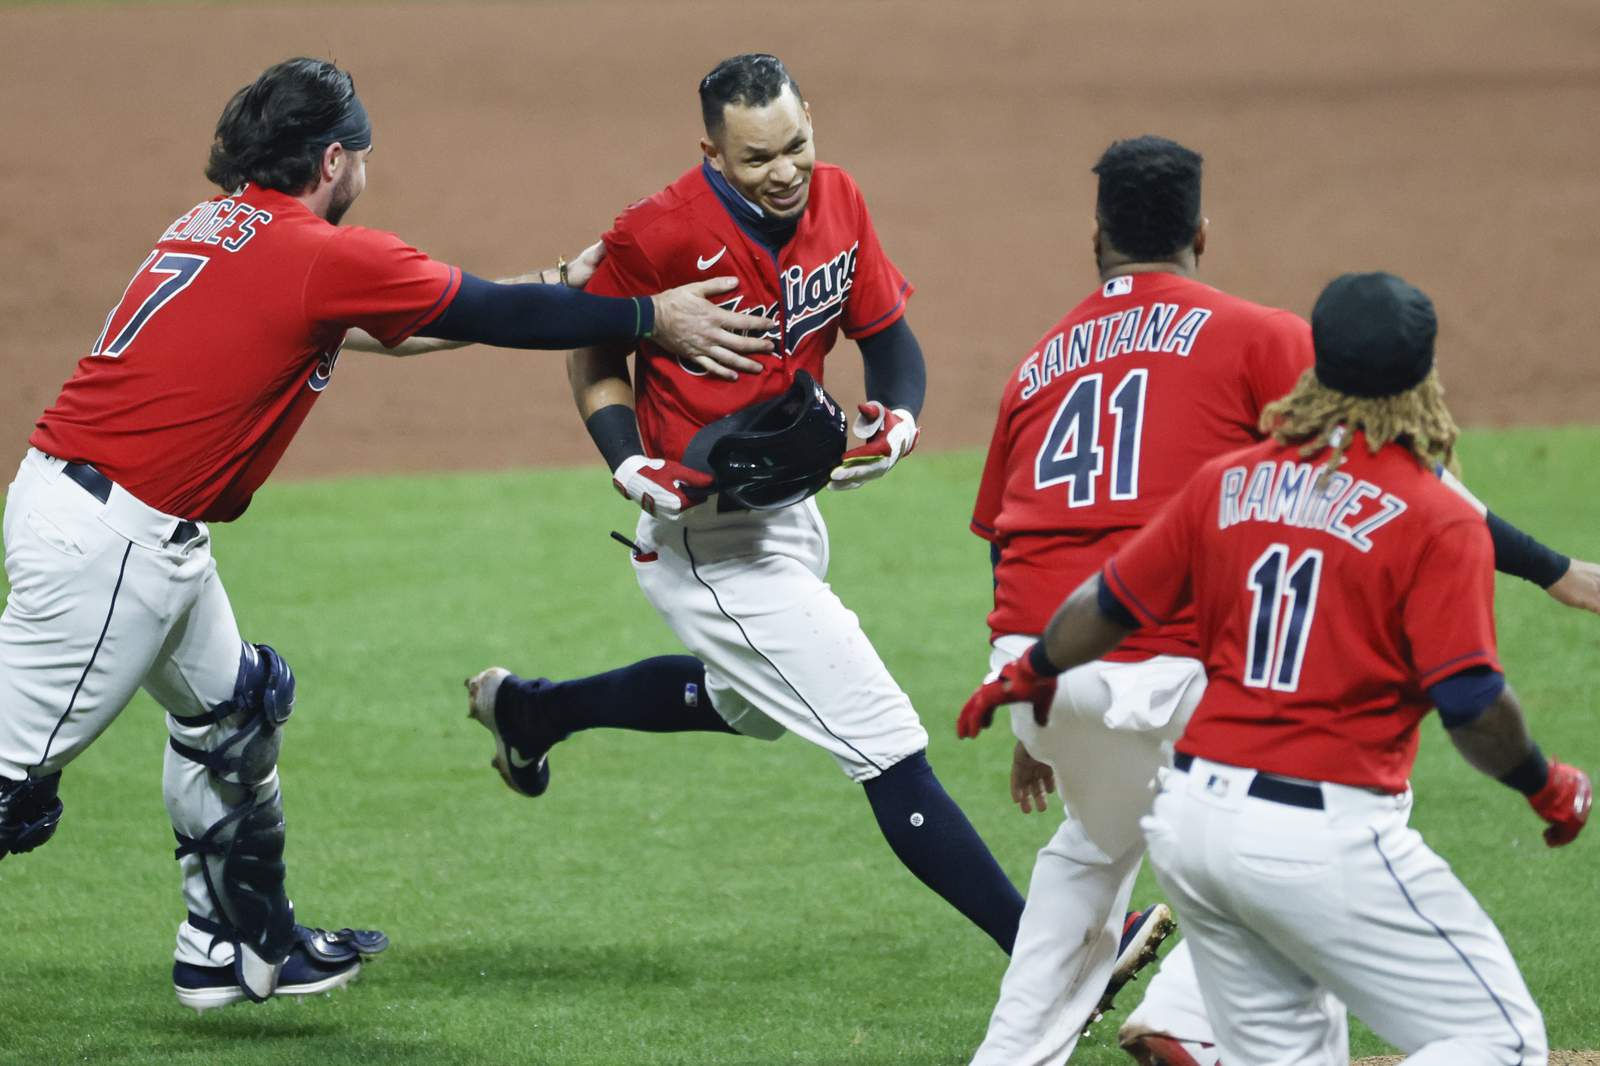 Walk away: Indians rally again, keep AL Central hopes alive